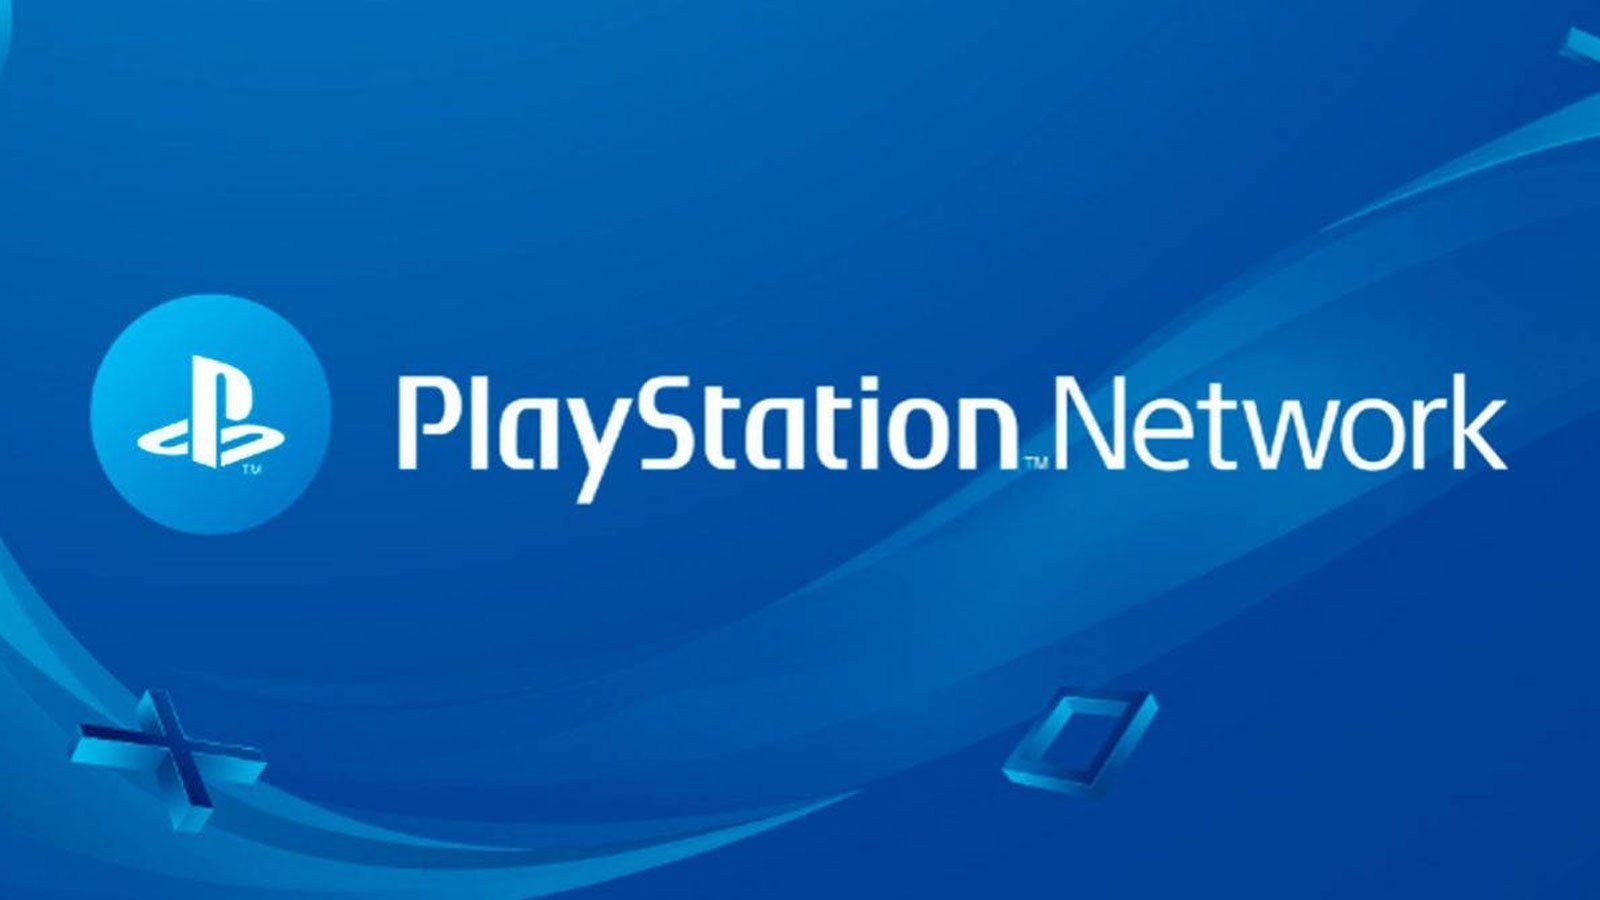 Unable To Connect To PlayStation Network?